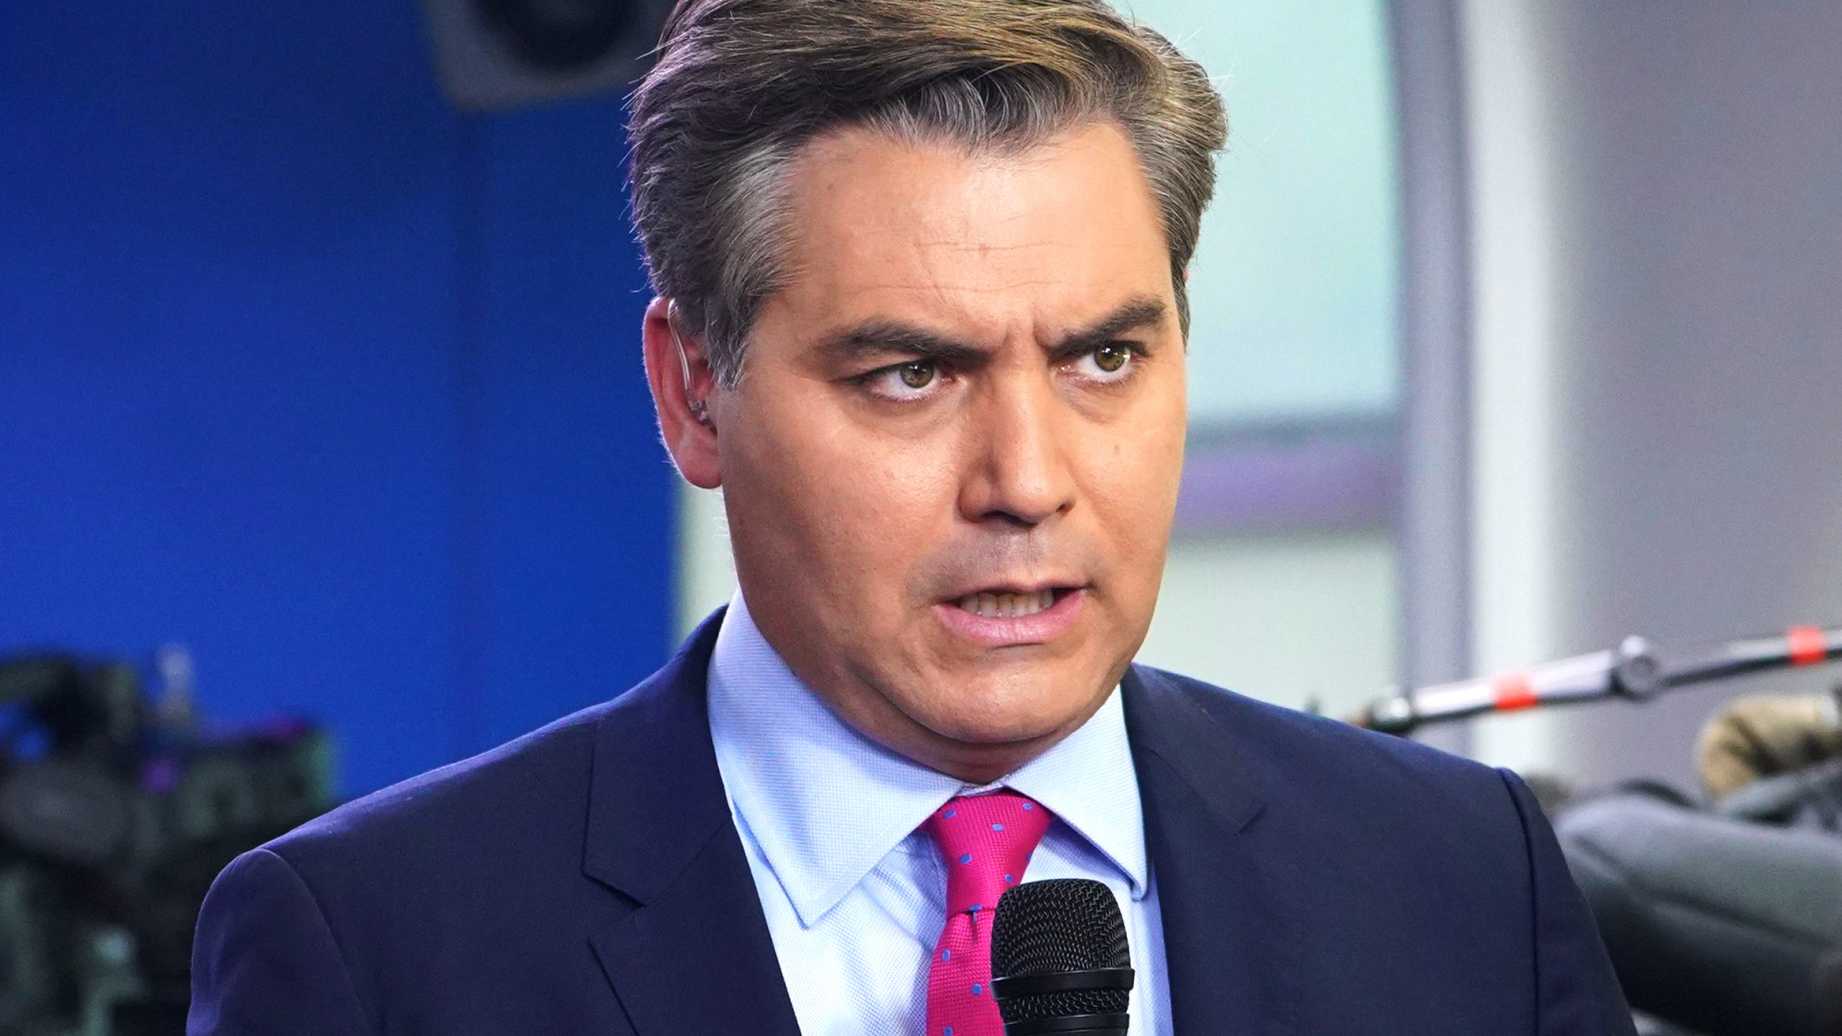 Jim Acosta on His Book 'The Enemy of the People'